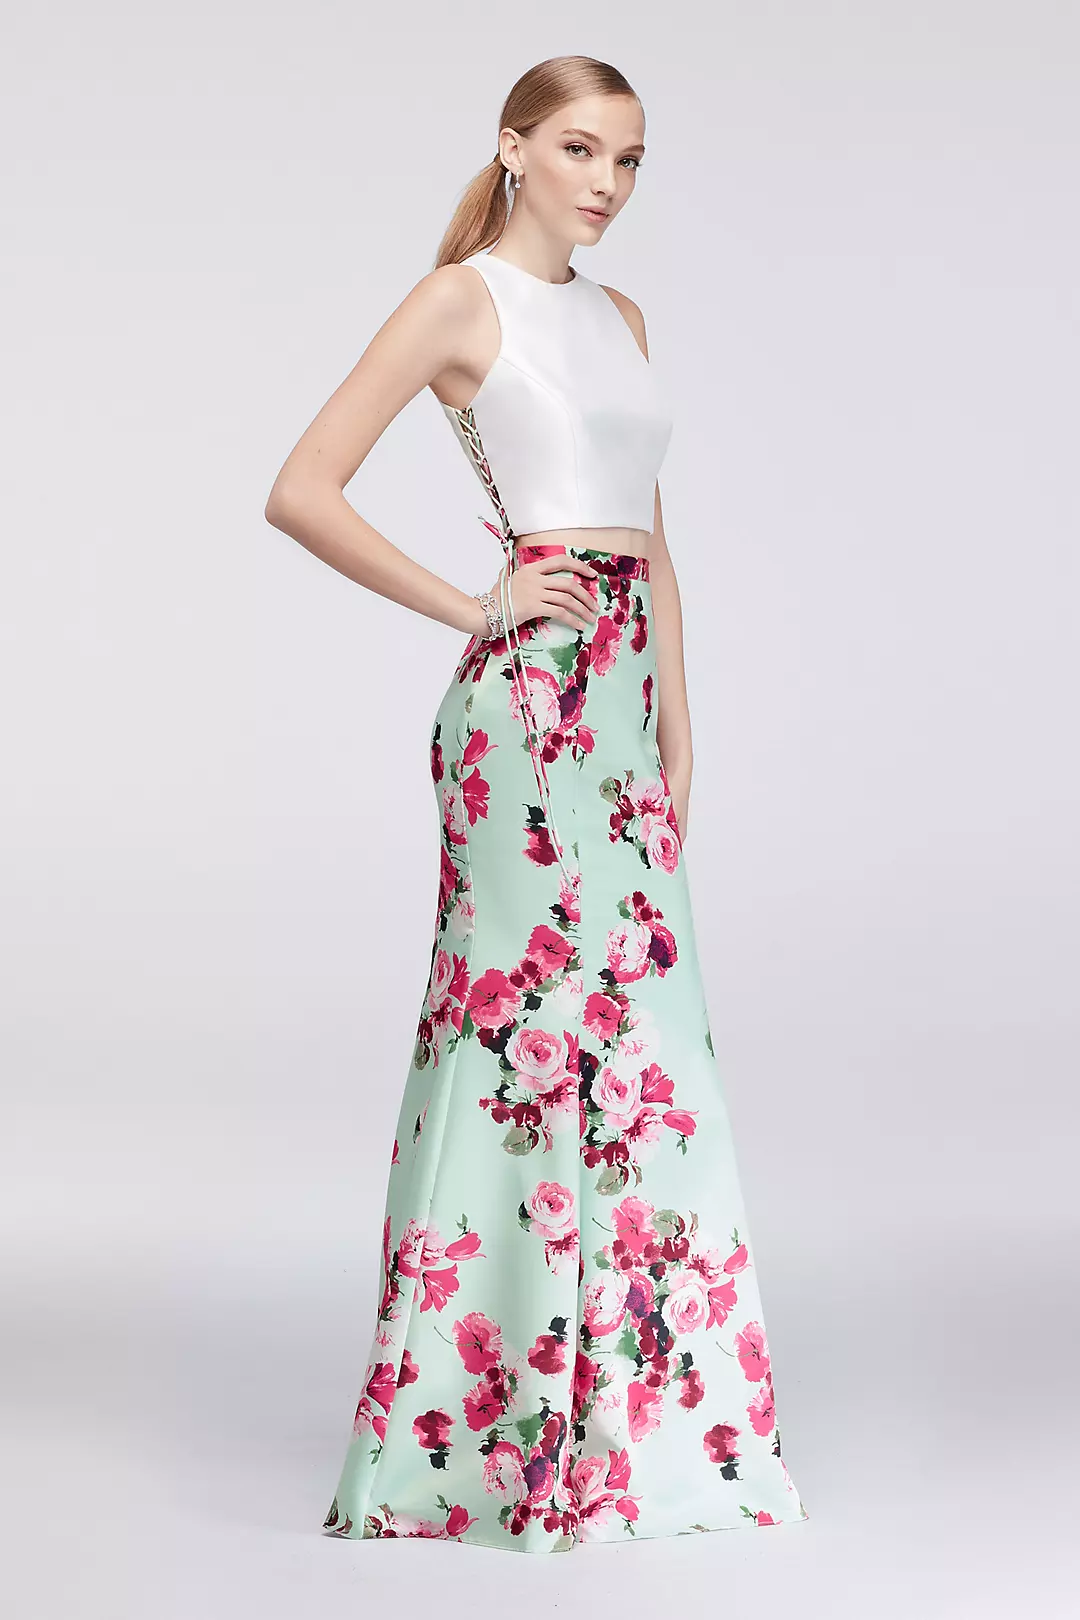 Laced-Side Top and Floral Skirt Two-Piece Dress Image